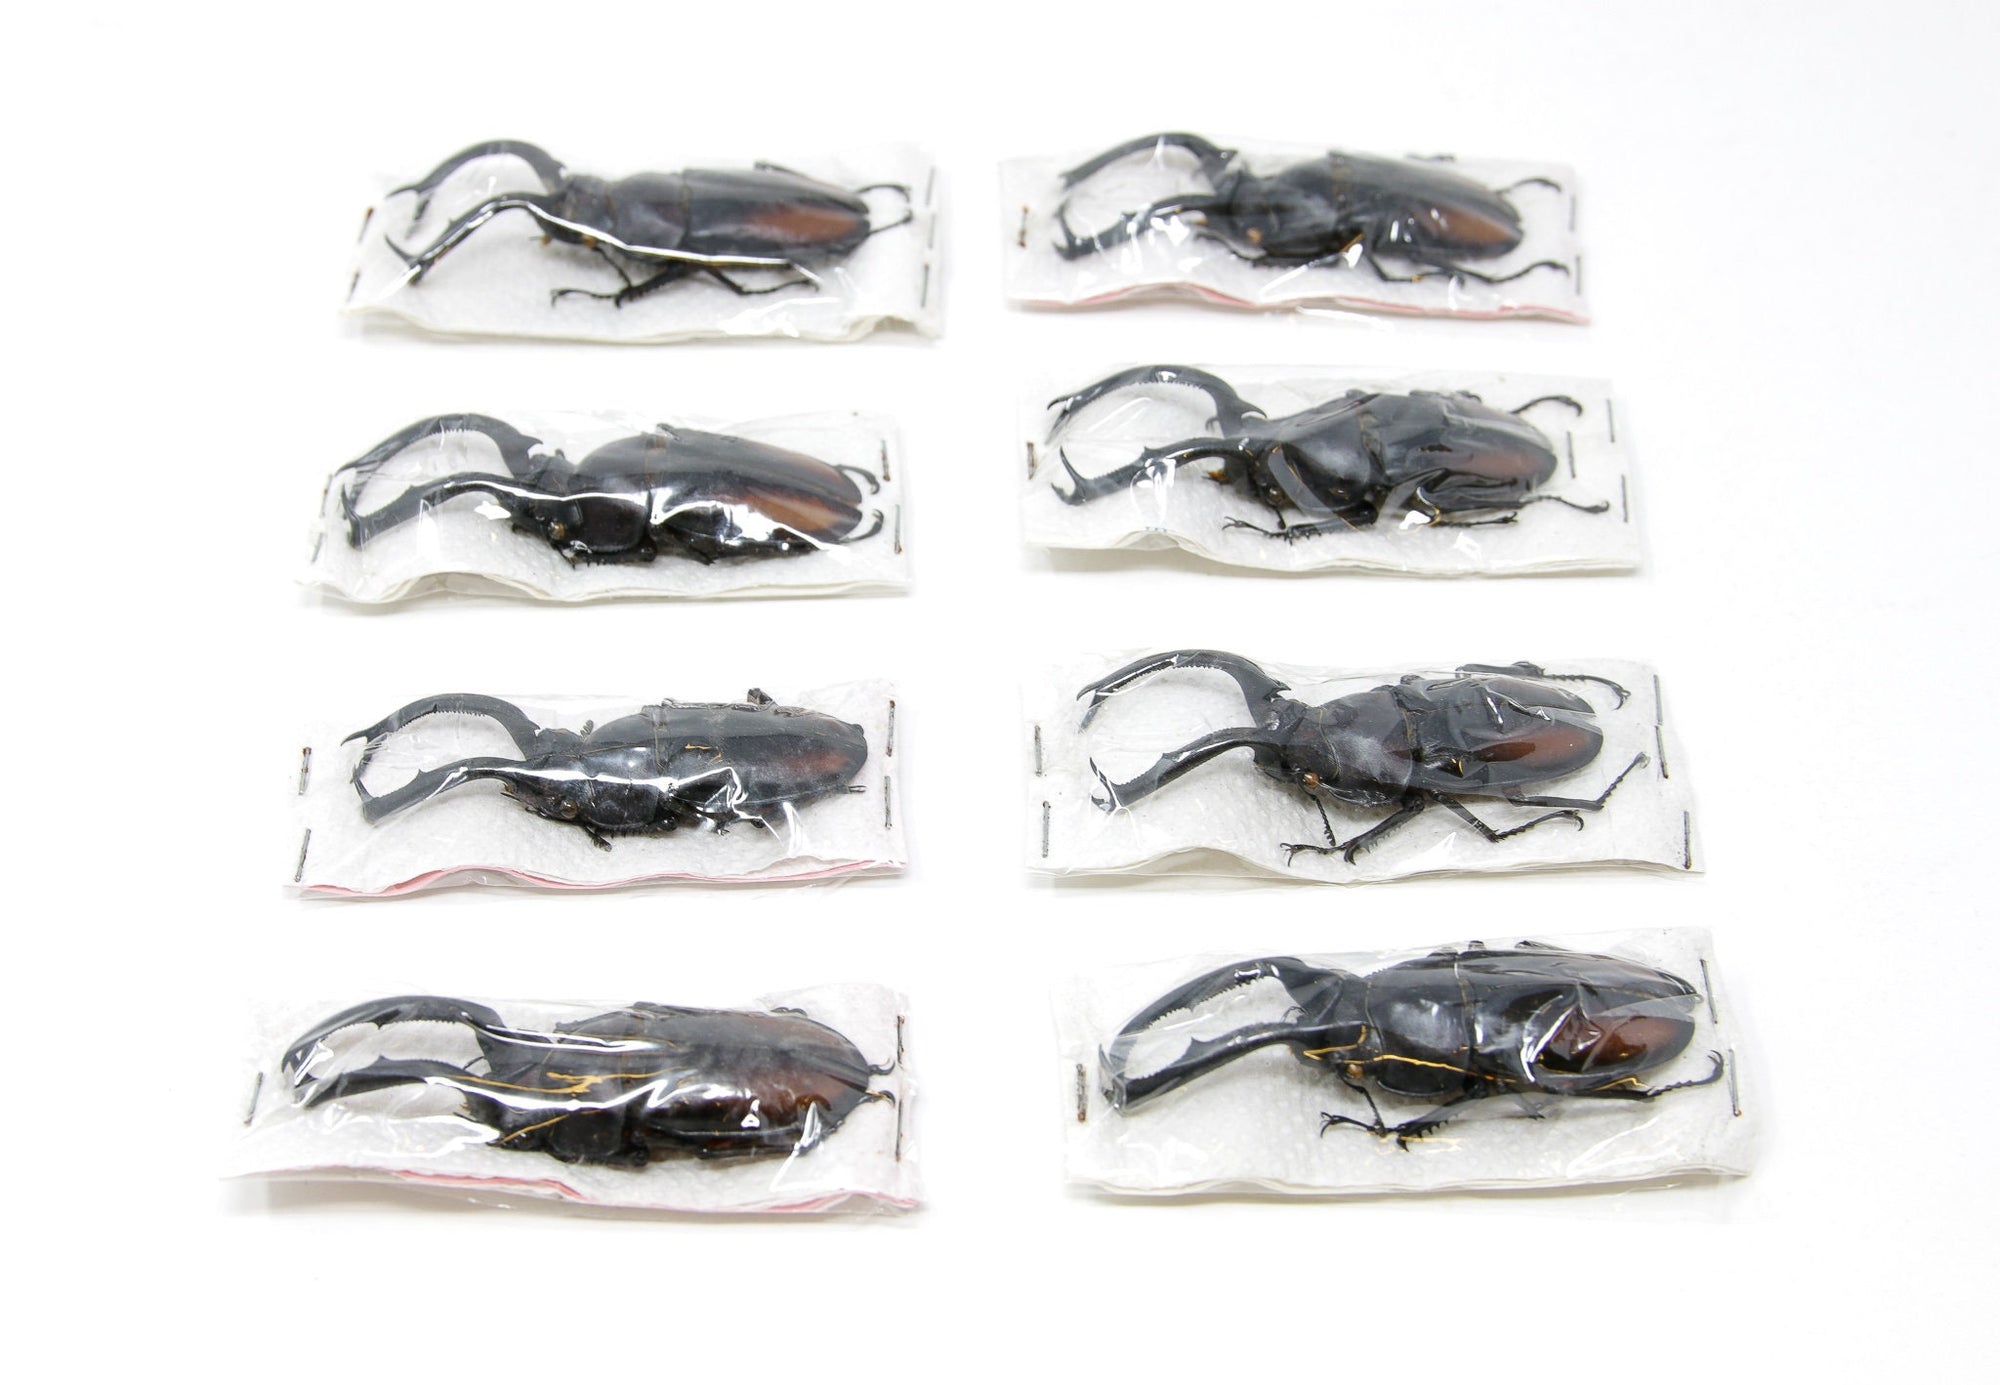 Rhaetulus didieri, Lucanidae Stag Beetles Unmounted Specimen with Scientific Collection Data, A1 Quality